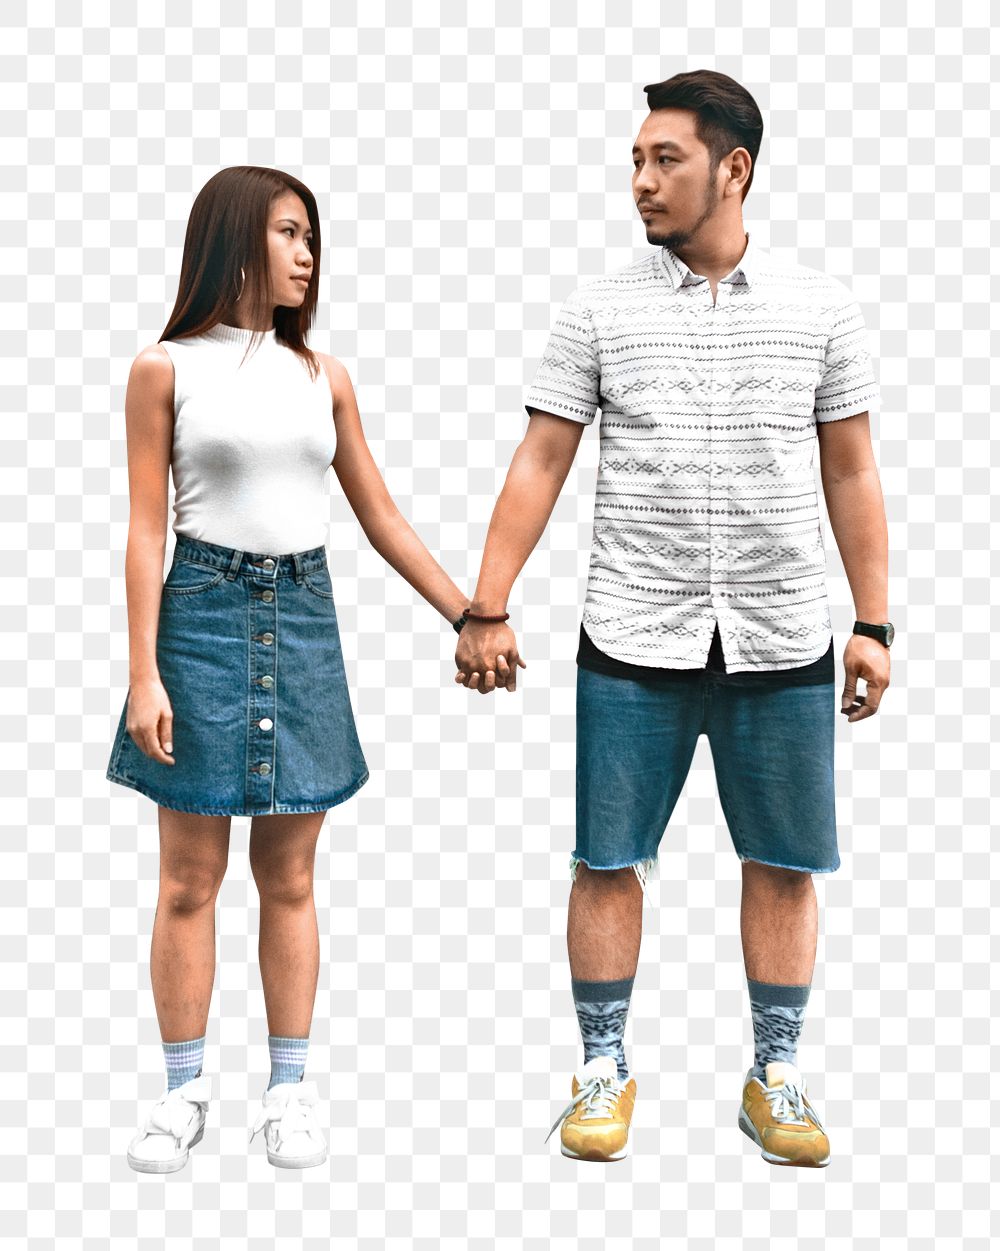 Hand-holding Asian couple  png, transparent background